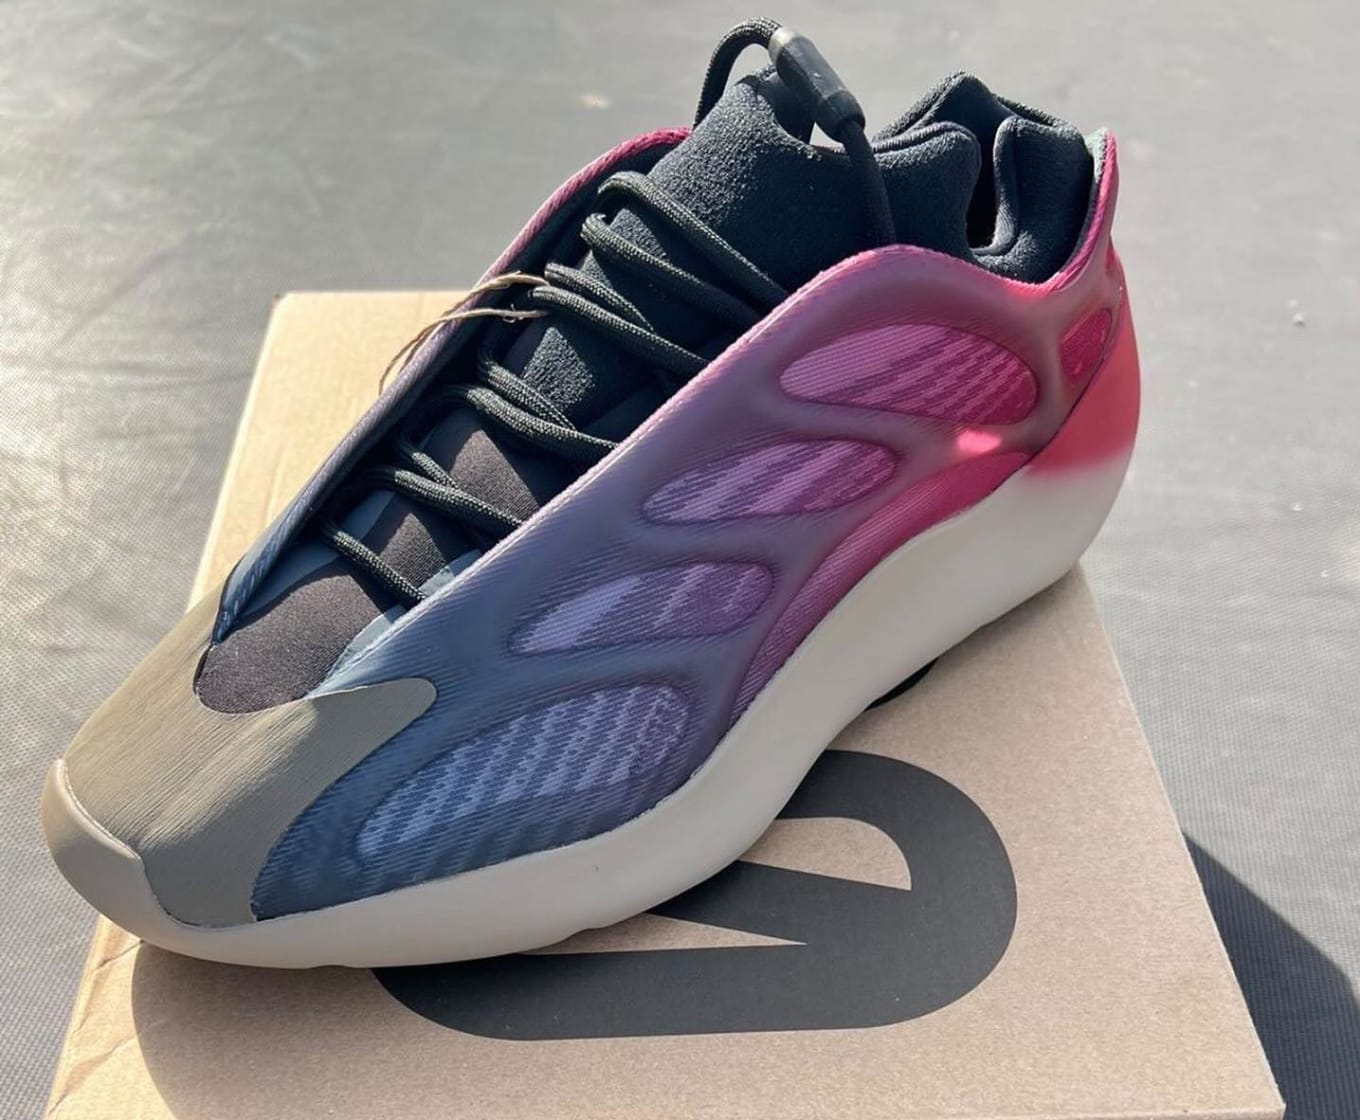 Adidas Yeezy 700 V3 'Fade Carbon' Release Date GW1814 | Sole Collector